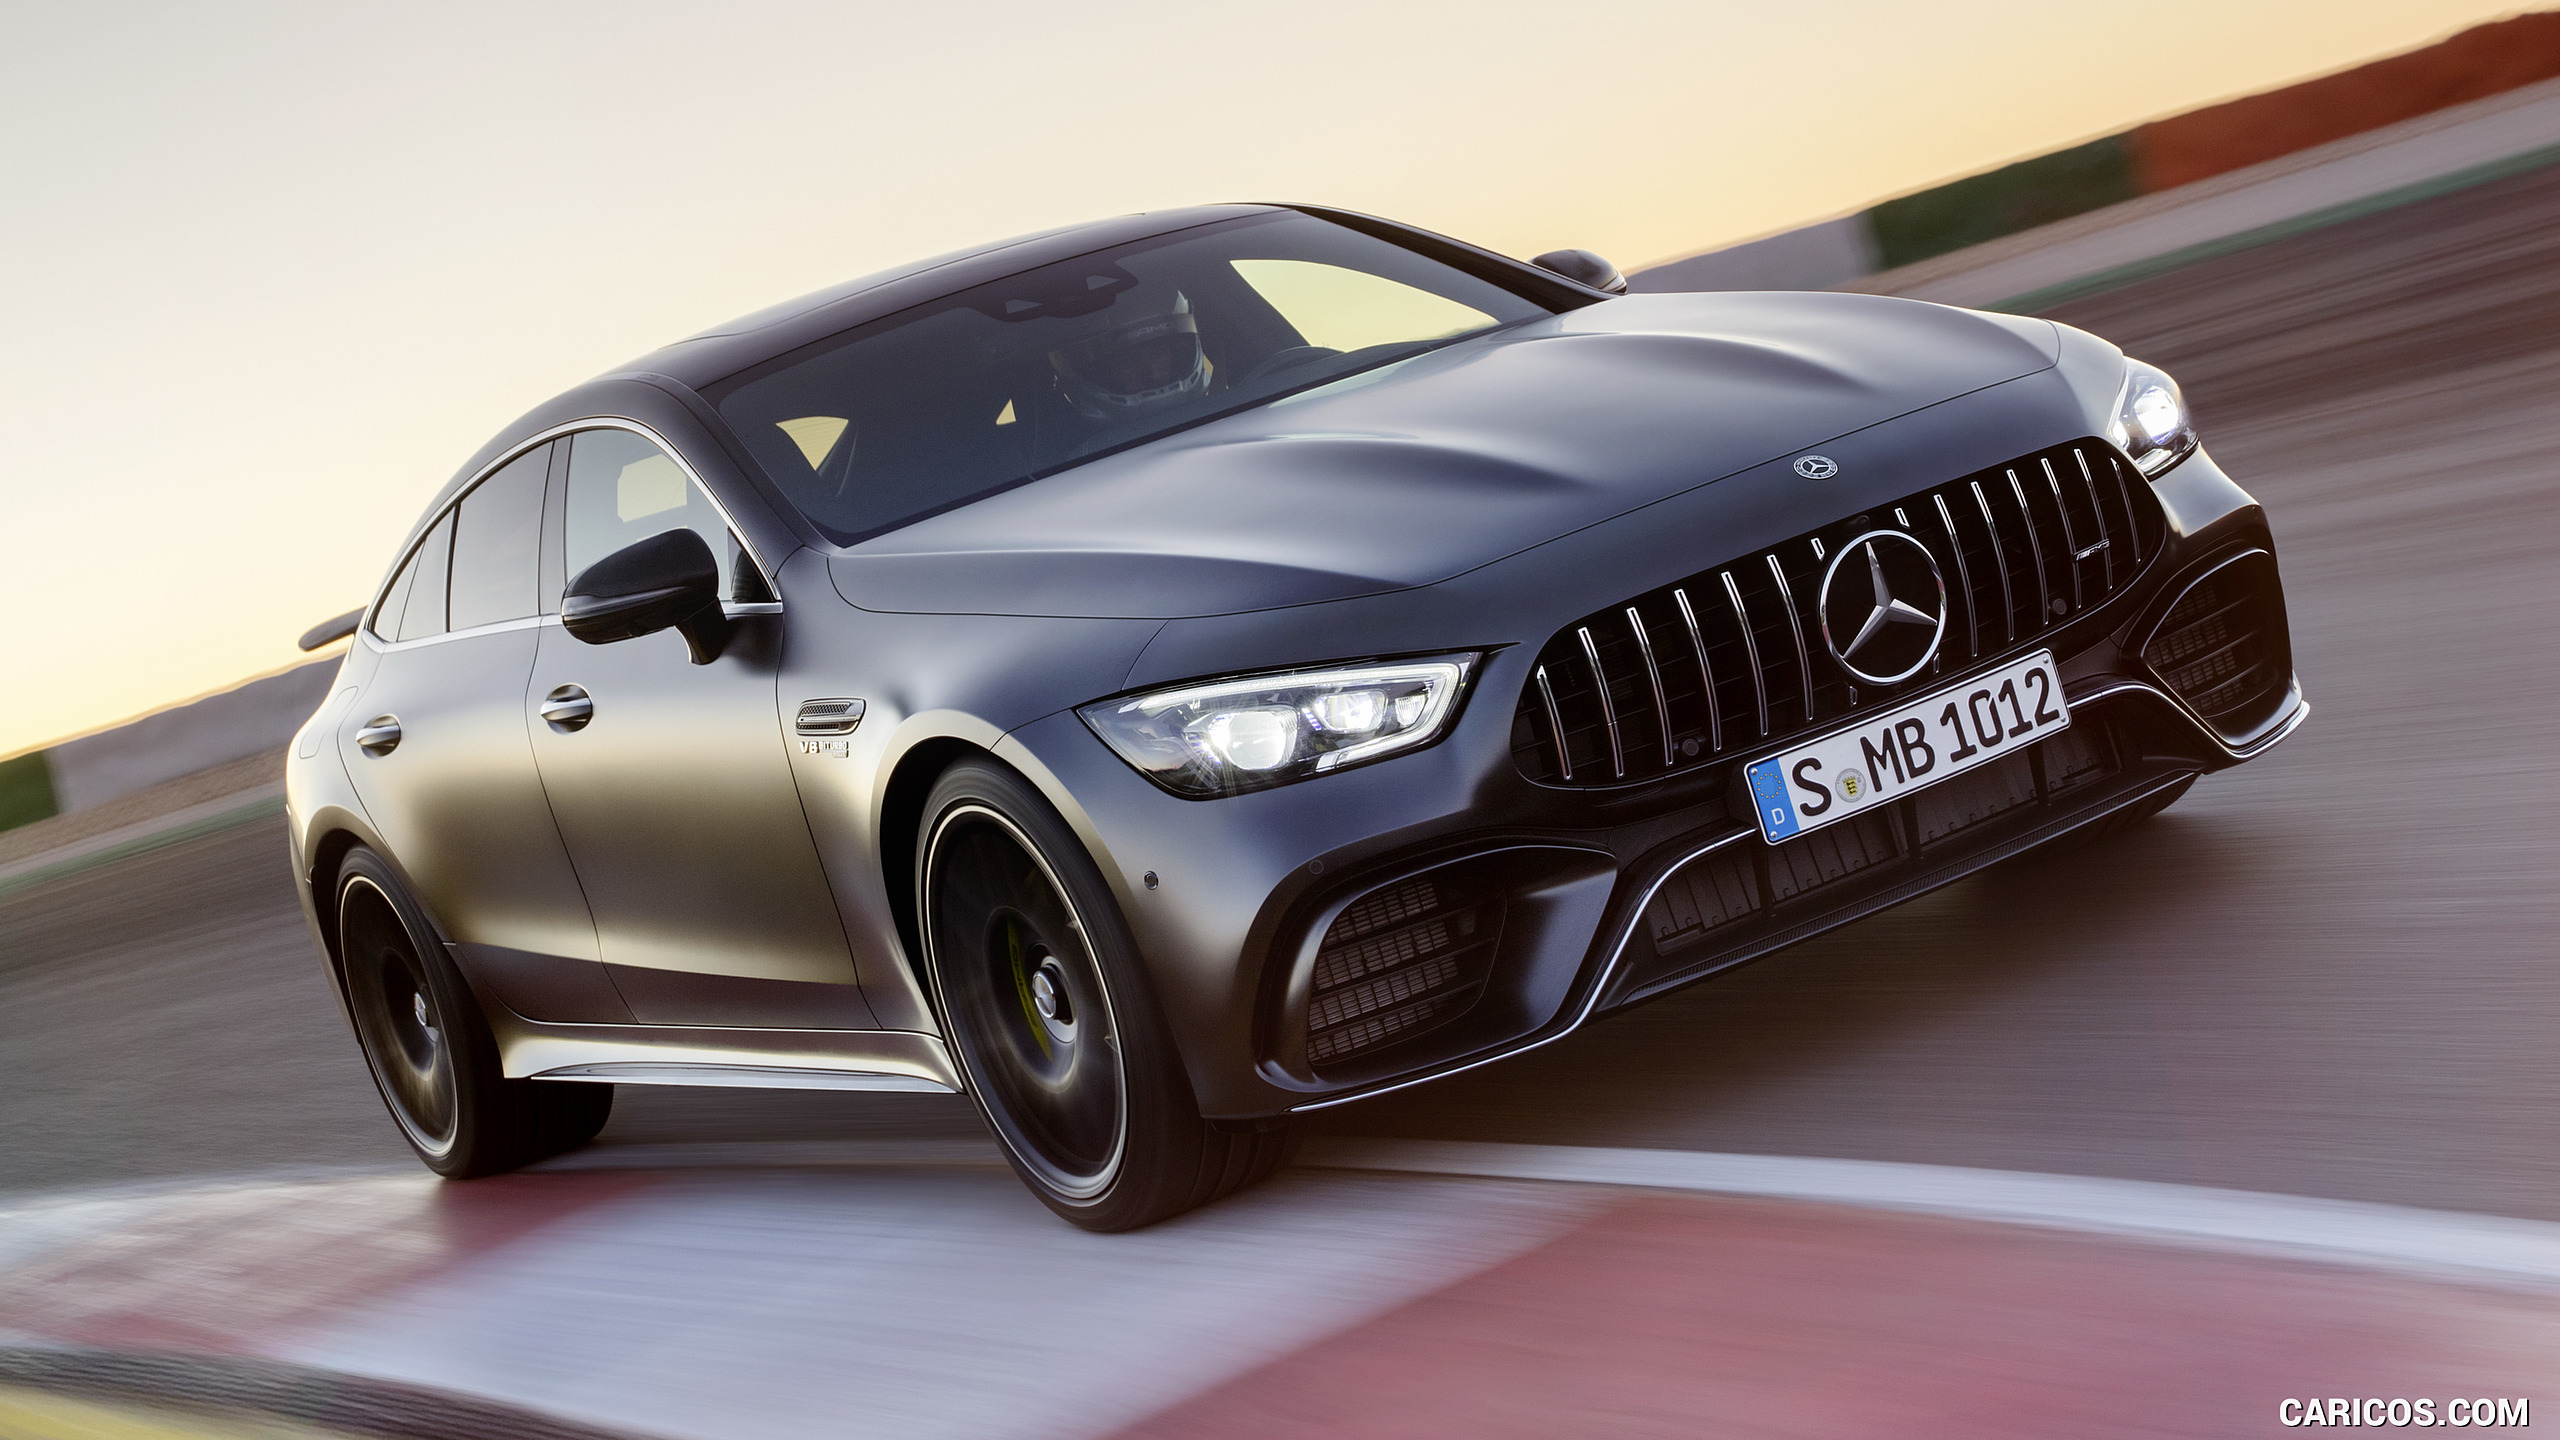 2019 Mercedes-AMG GT 63 S 4MATIC+ 4-Door Coupe (Color: Graphite Grey Magno) - Front Three-Quarter, #2 of 427